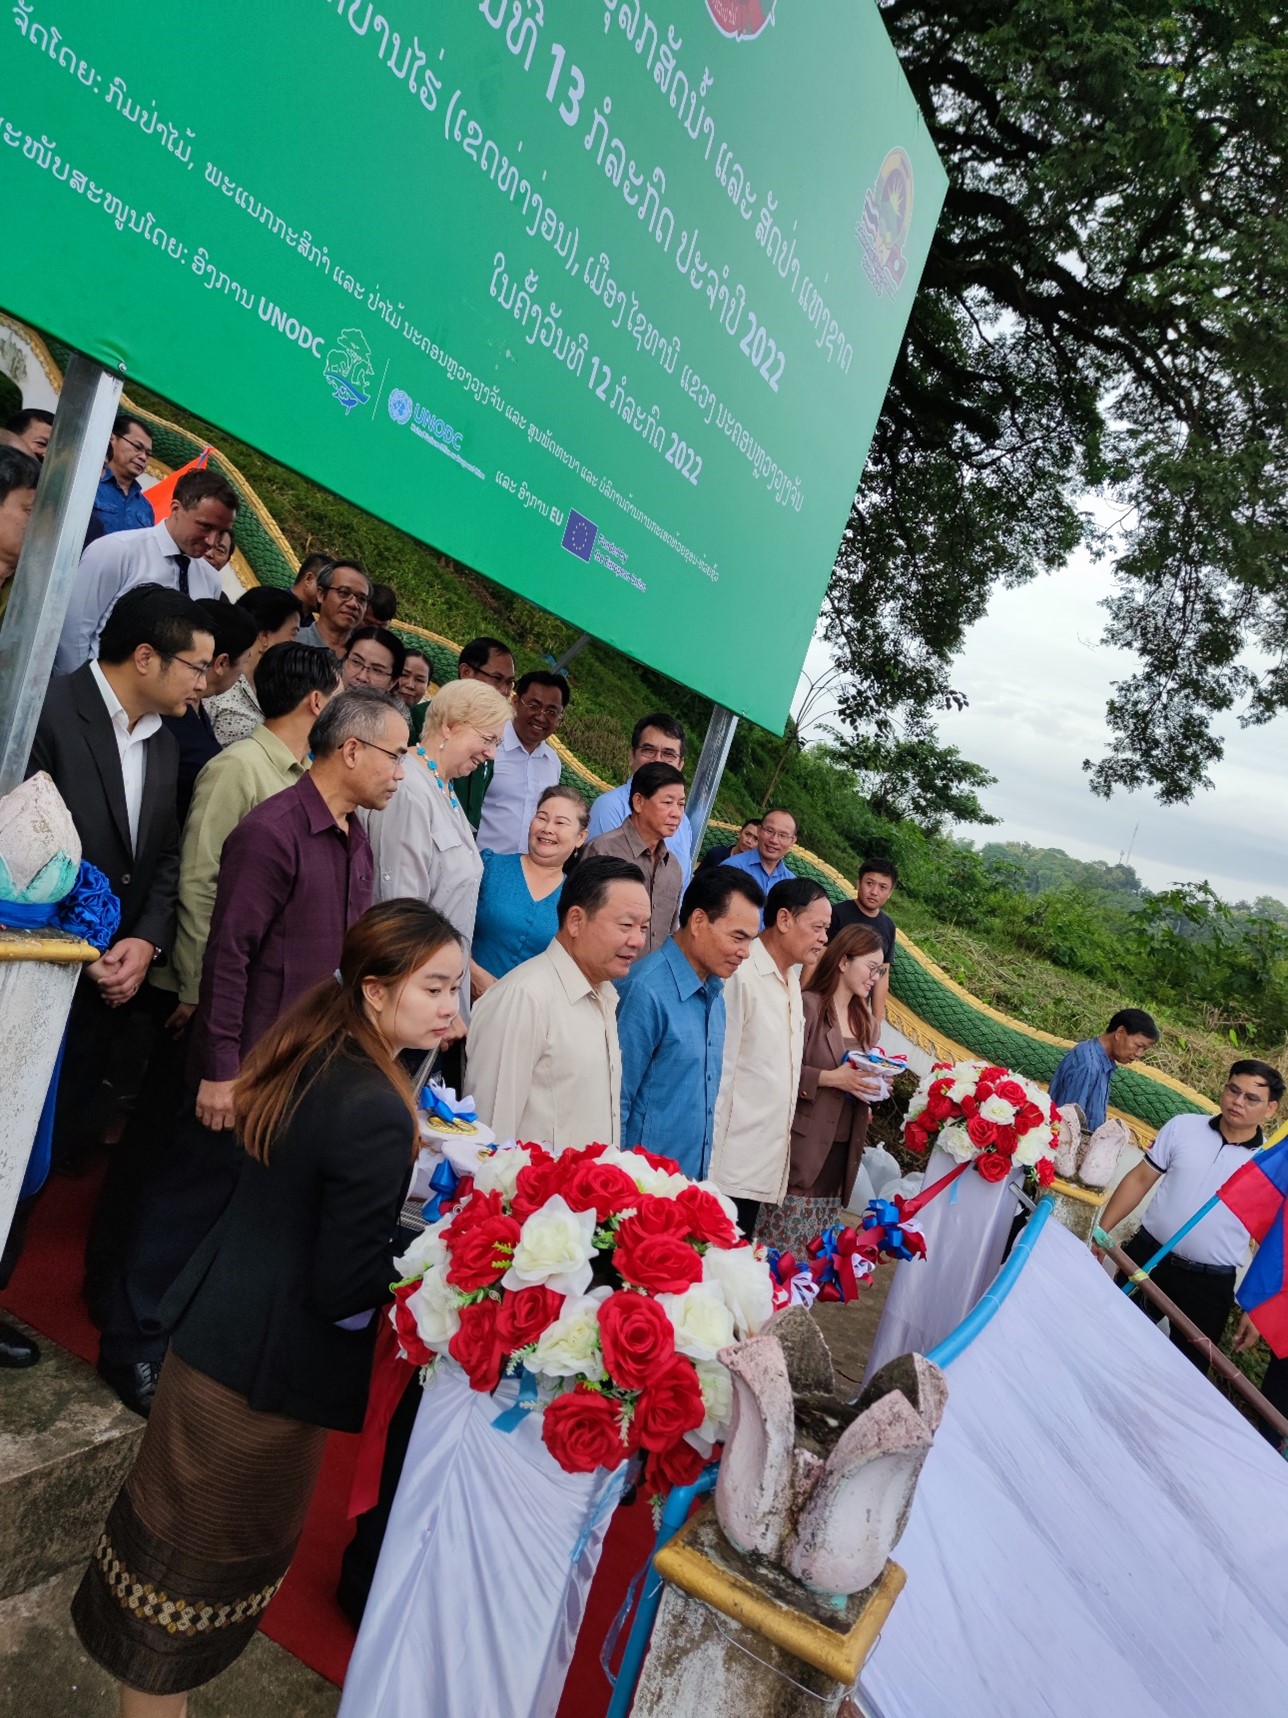 <p>Celebration of the National Aquatic and Wildlife Day of Lao PDR in Hai village on 13 July 2022, supported by the European Union and UNODC © EU Delegation to Laos</p>